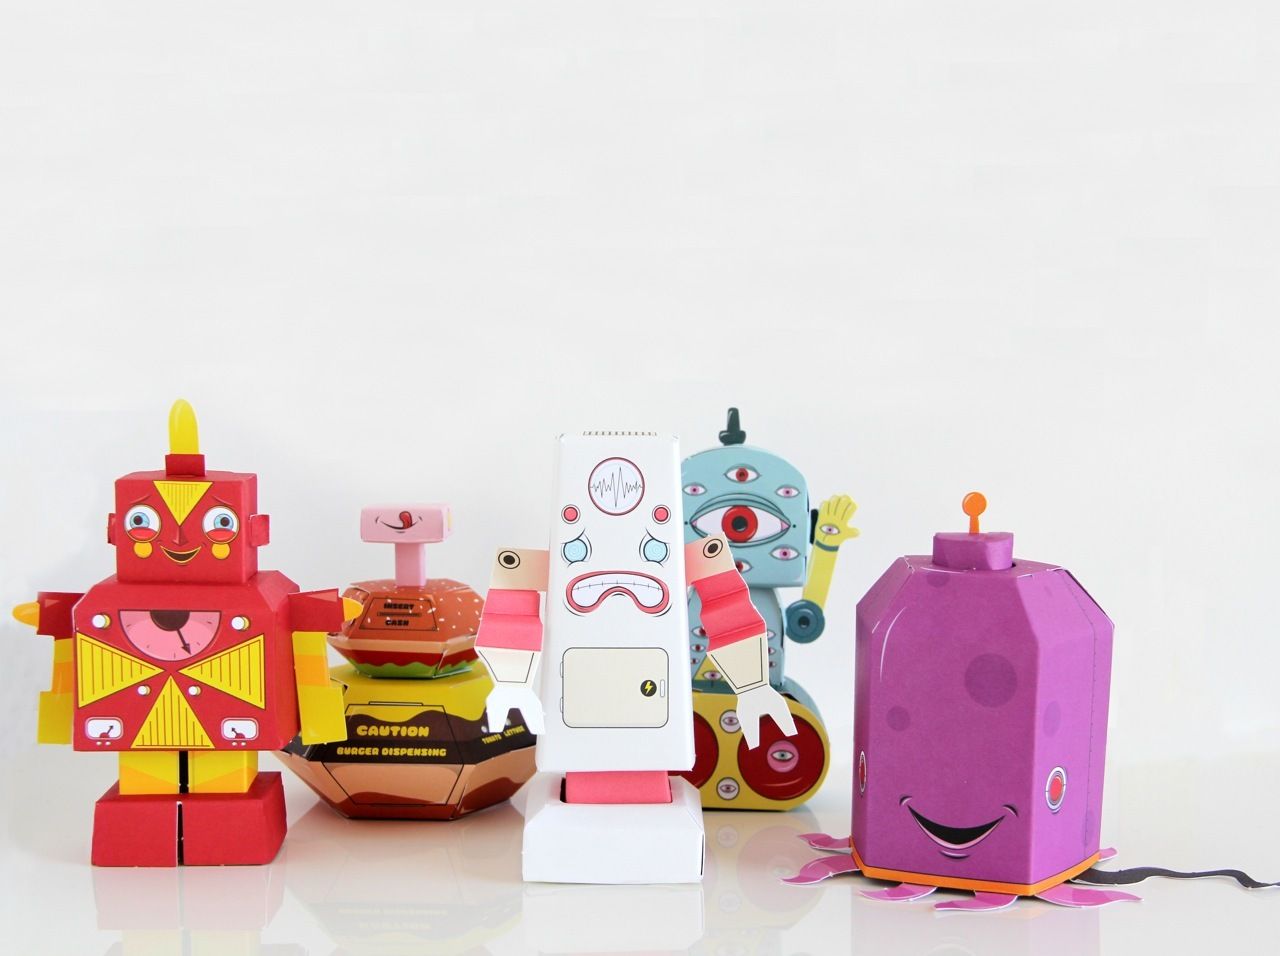 Papermade Paperbots: Creative non-electronic toys for 8 year olds